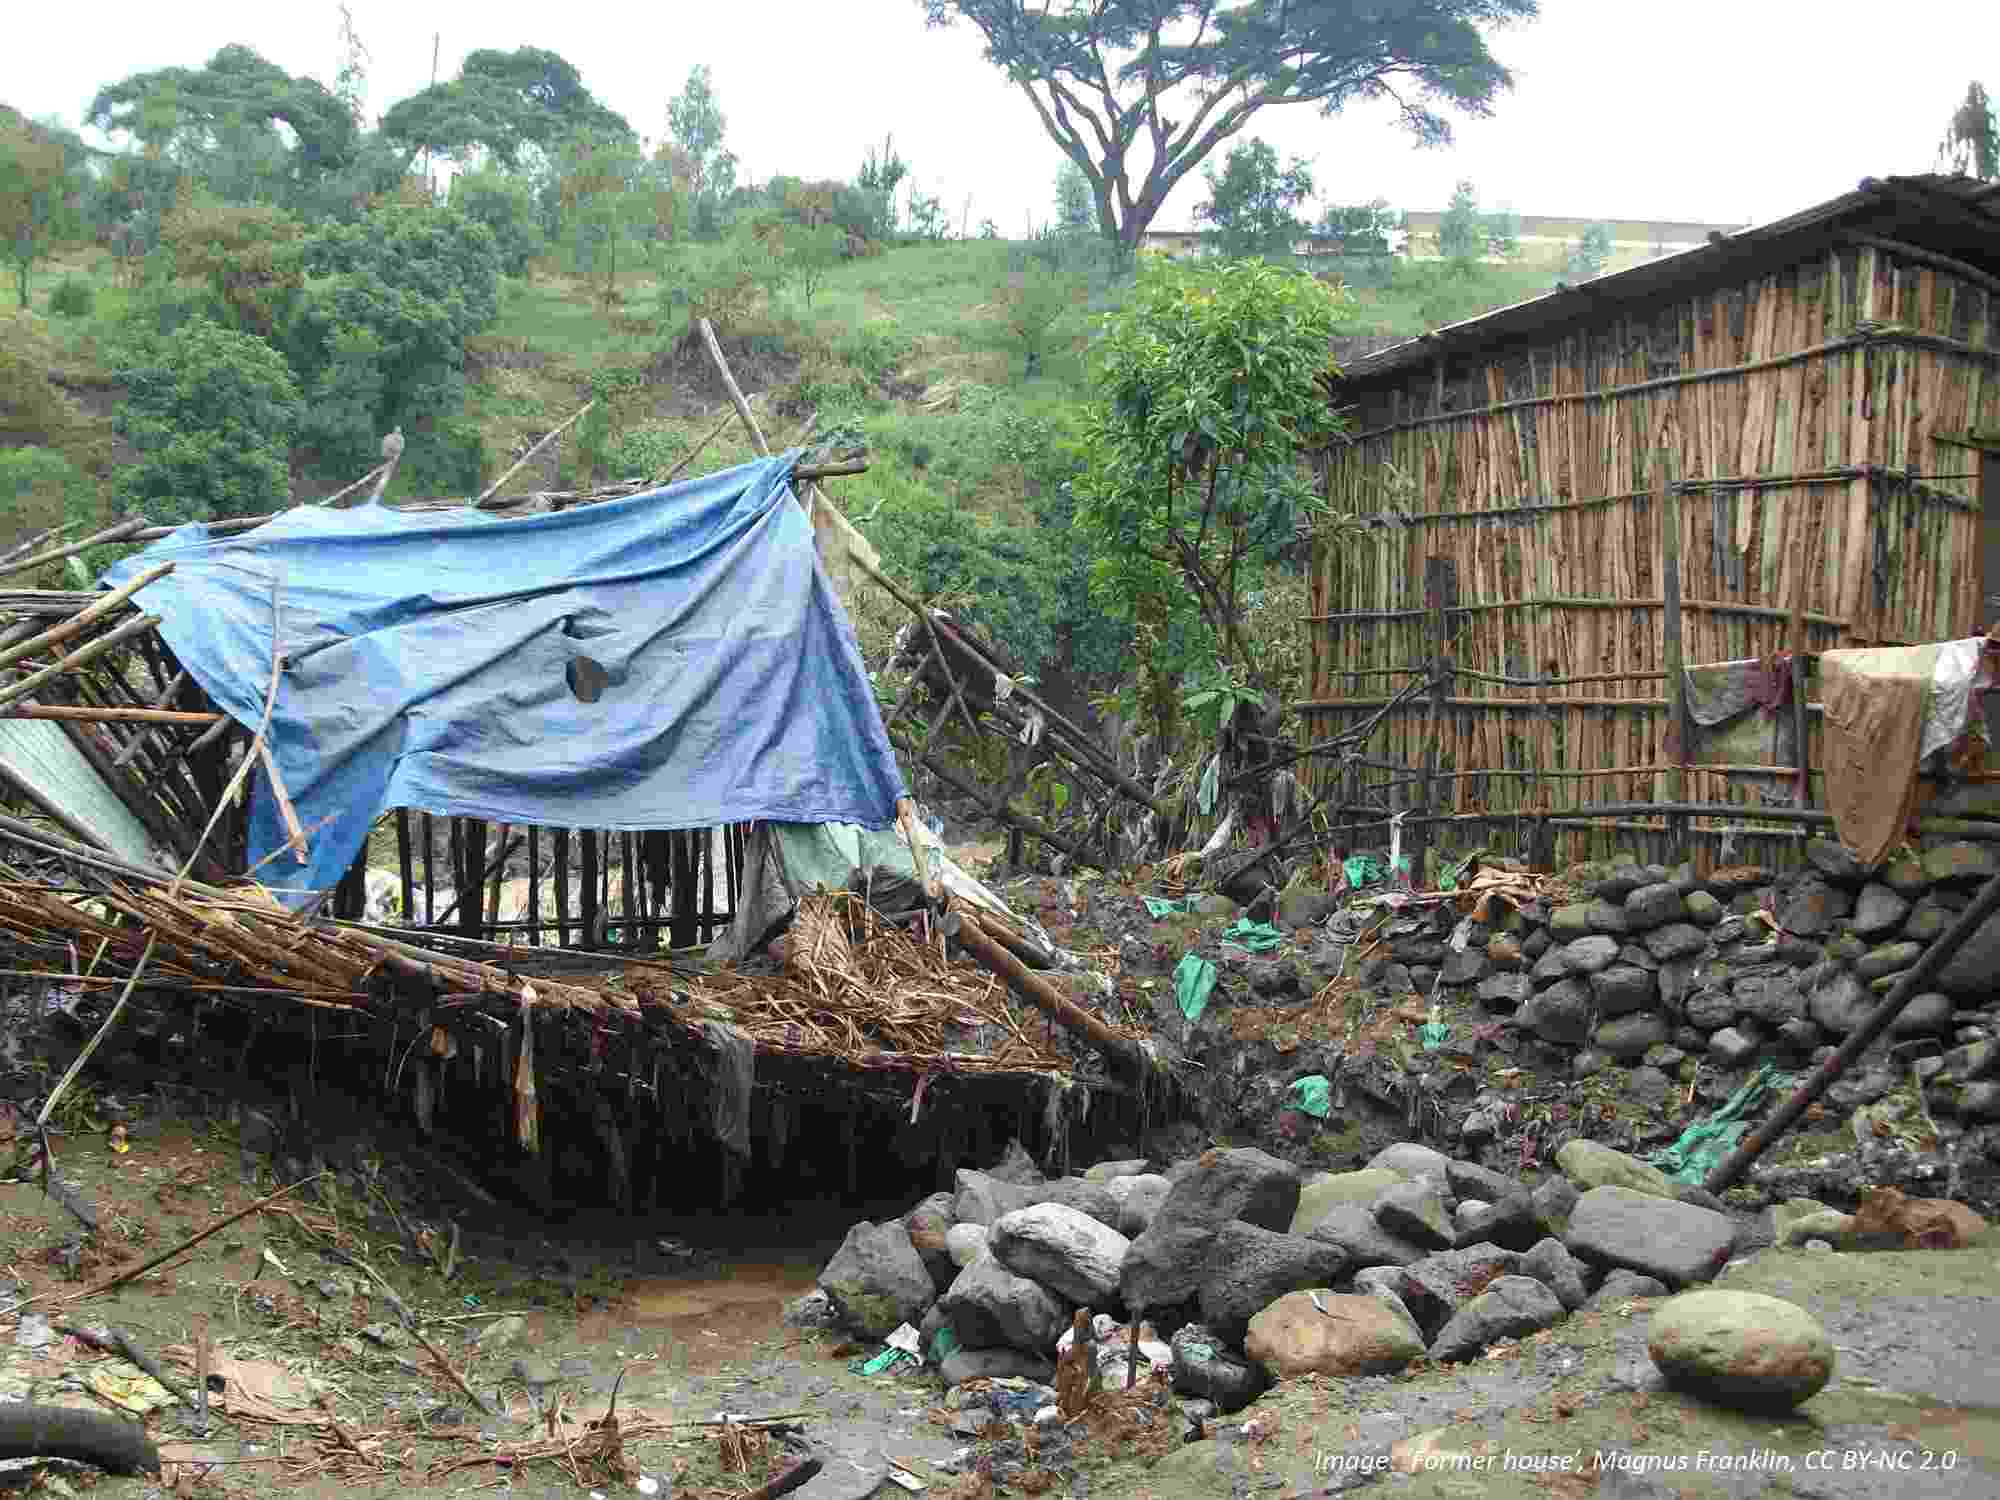 The remnants of a wooden home lie crumpled in a large pile covered by tarpaulin. Flood water has swept away the earth and rock foundation it was built upon. The house next door still stands.